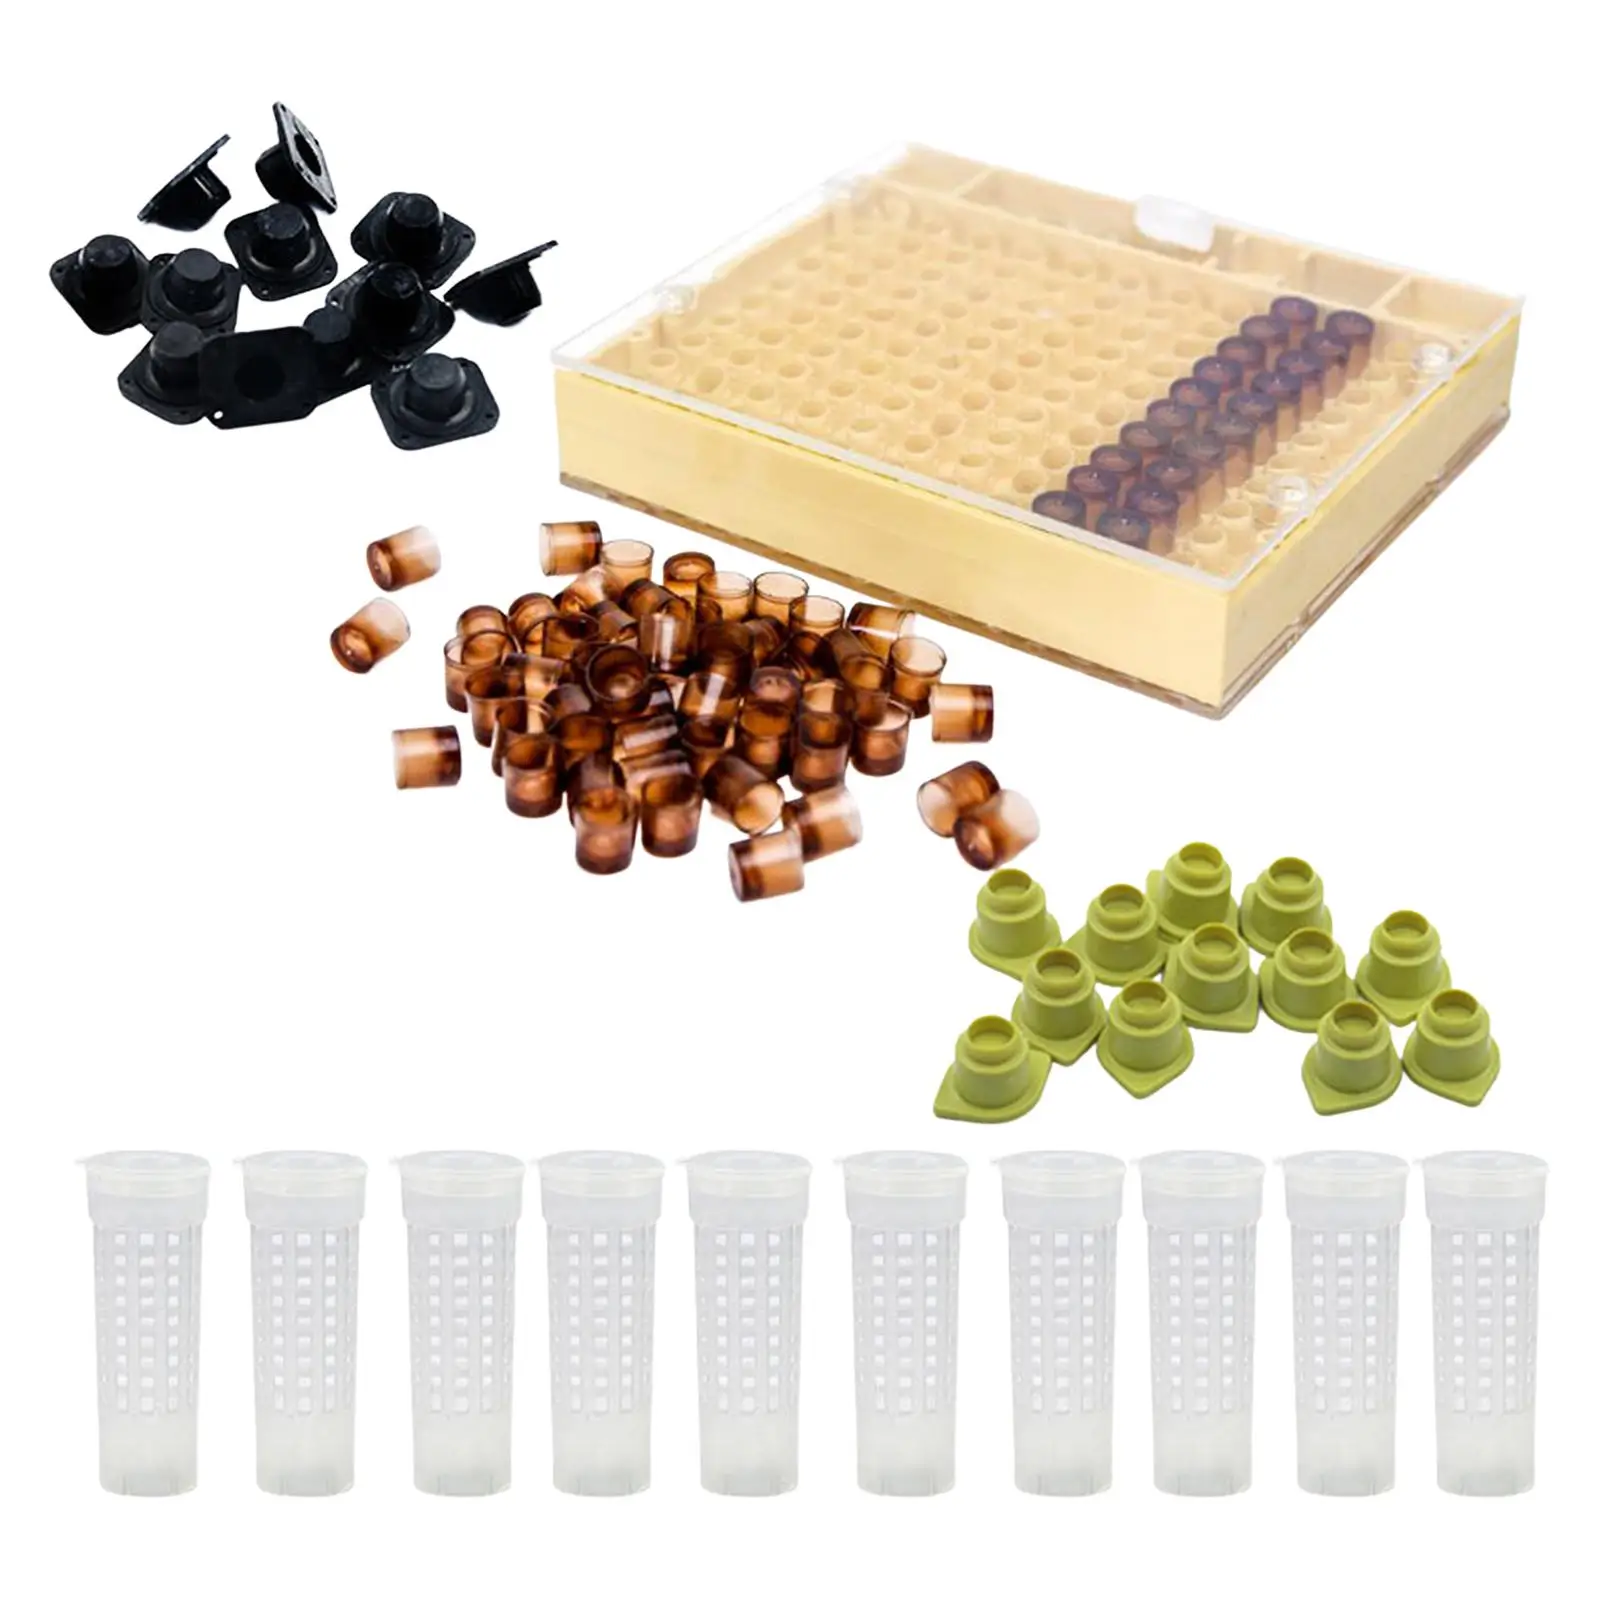 Beekeeping Complete Queen Rearing cup Kit Cultivating Box Accessories Equipment